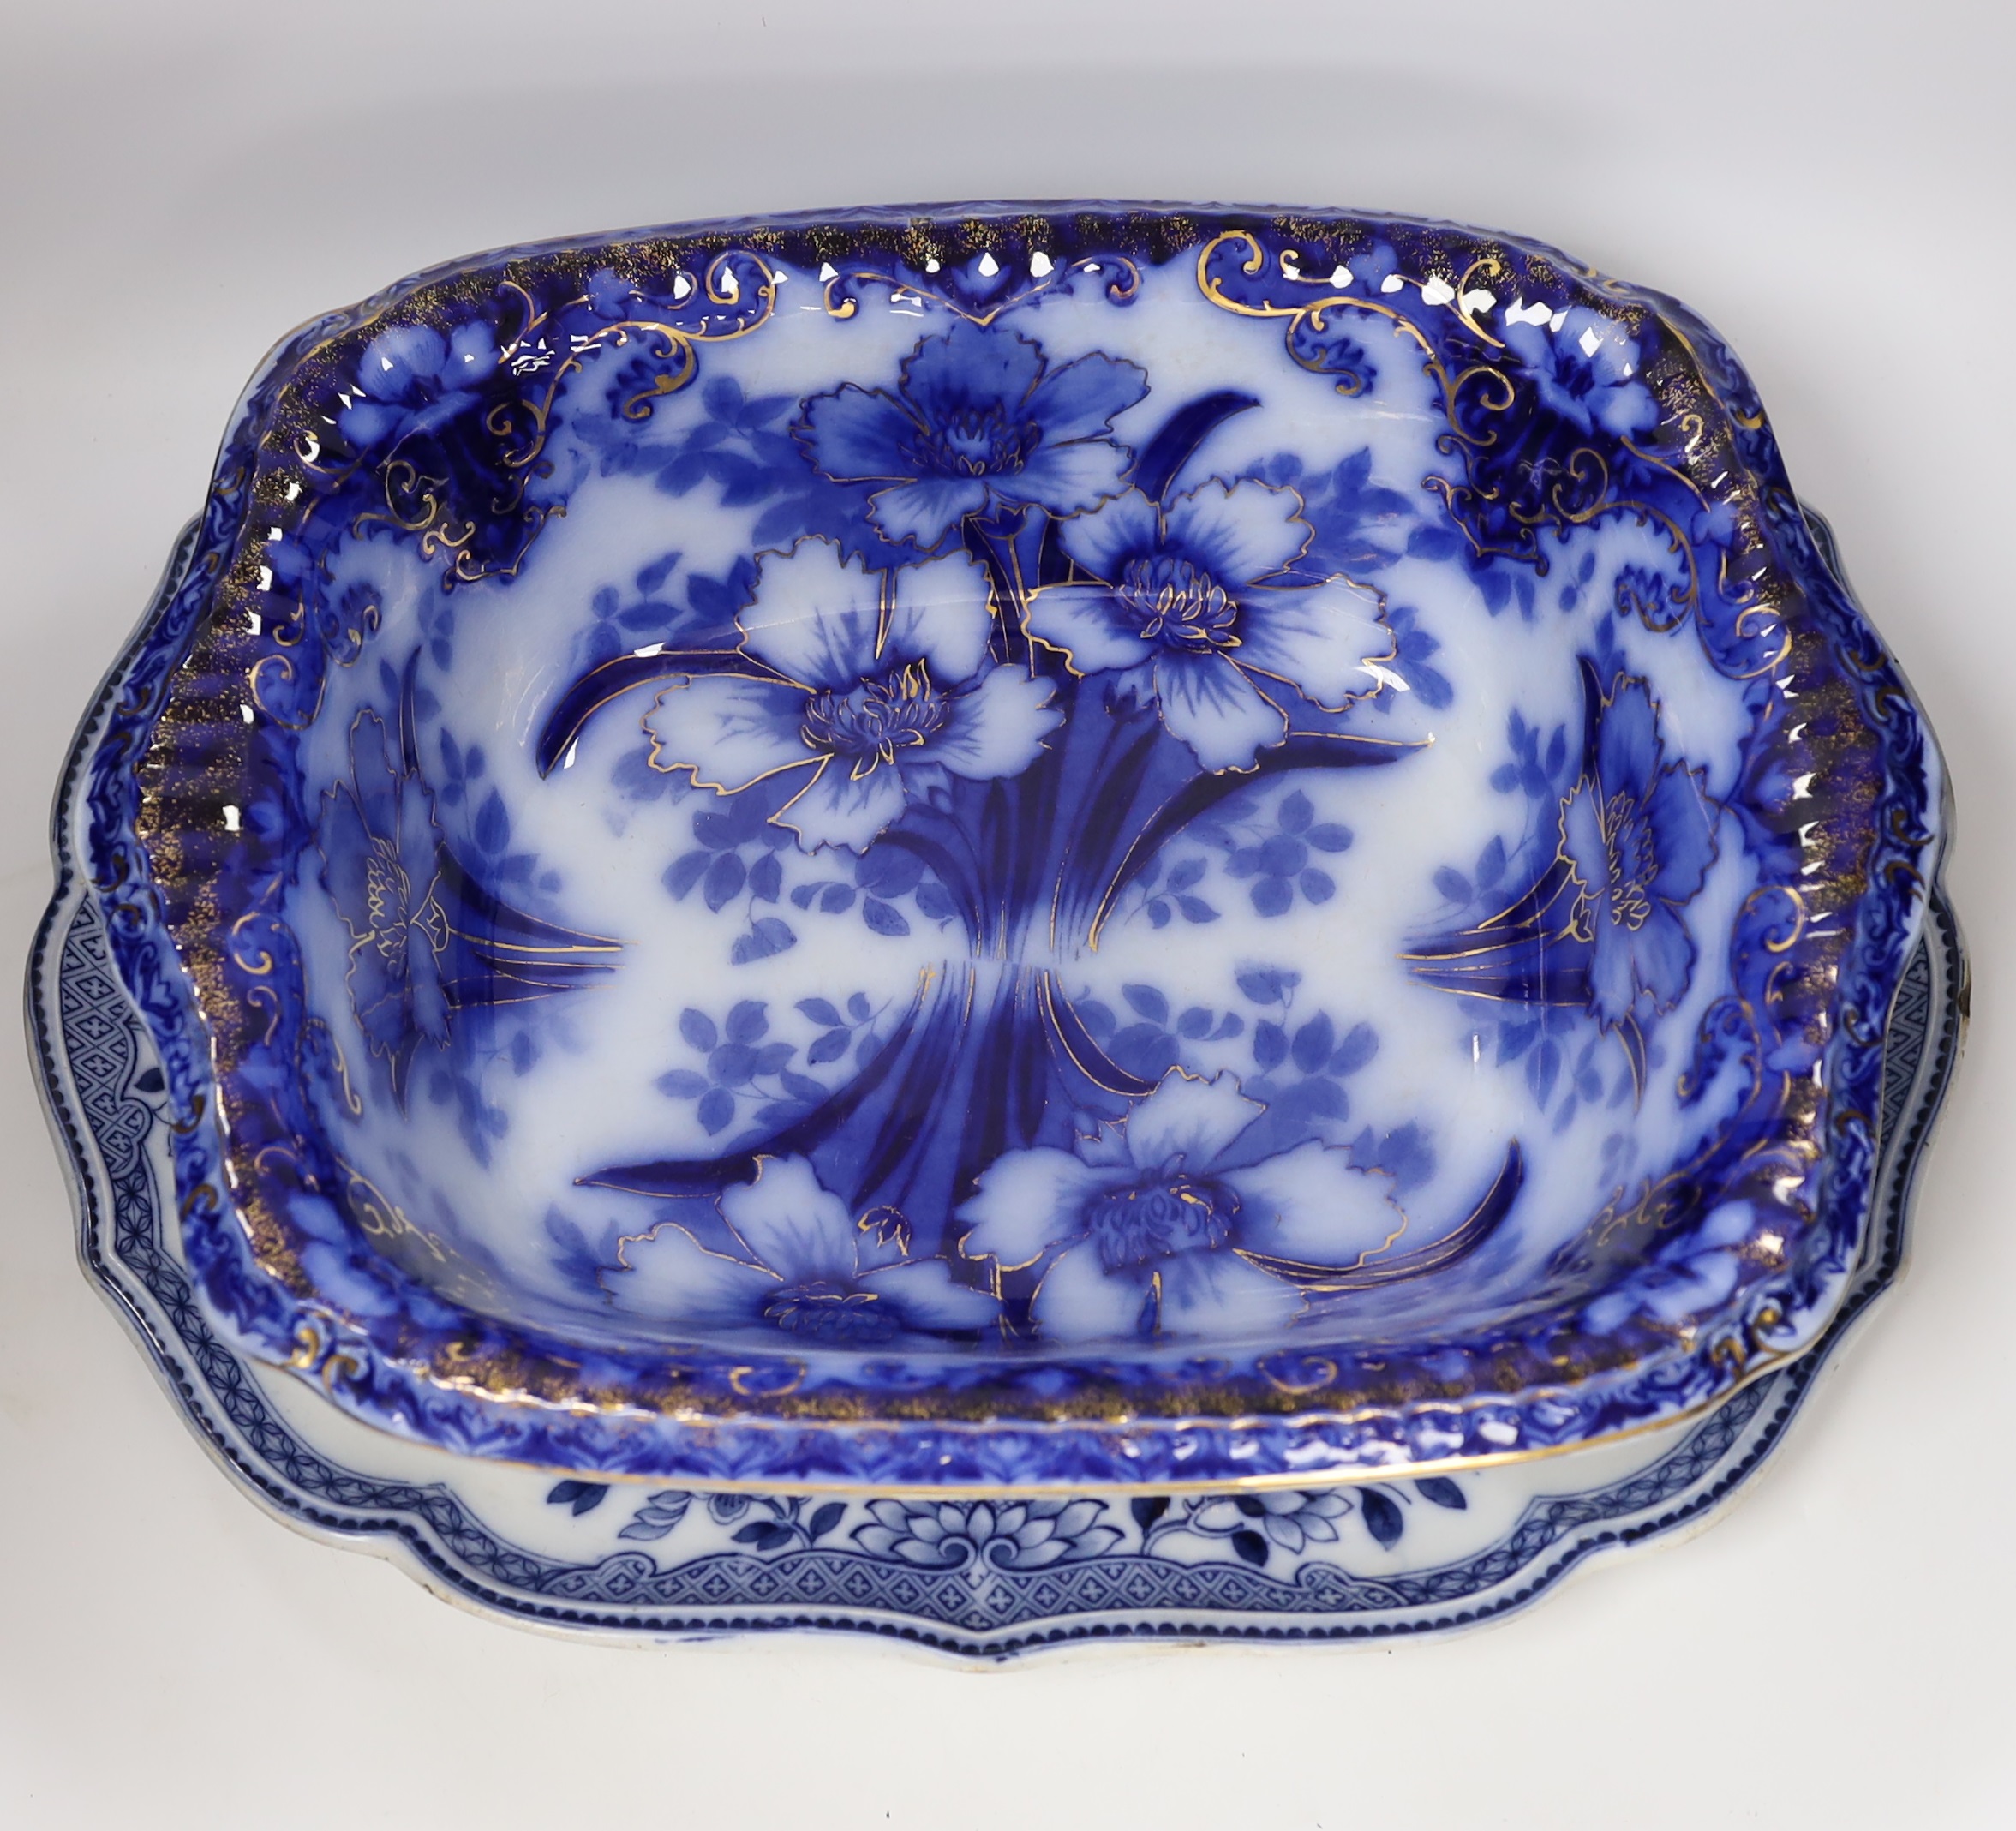 A Flow blue and gilt decorated bowl, a blue and white meat platter, a Royal Doulton vase, a gilt Egyptian inspired centrepiece and a set of six gilt bordered plates